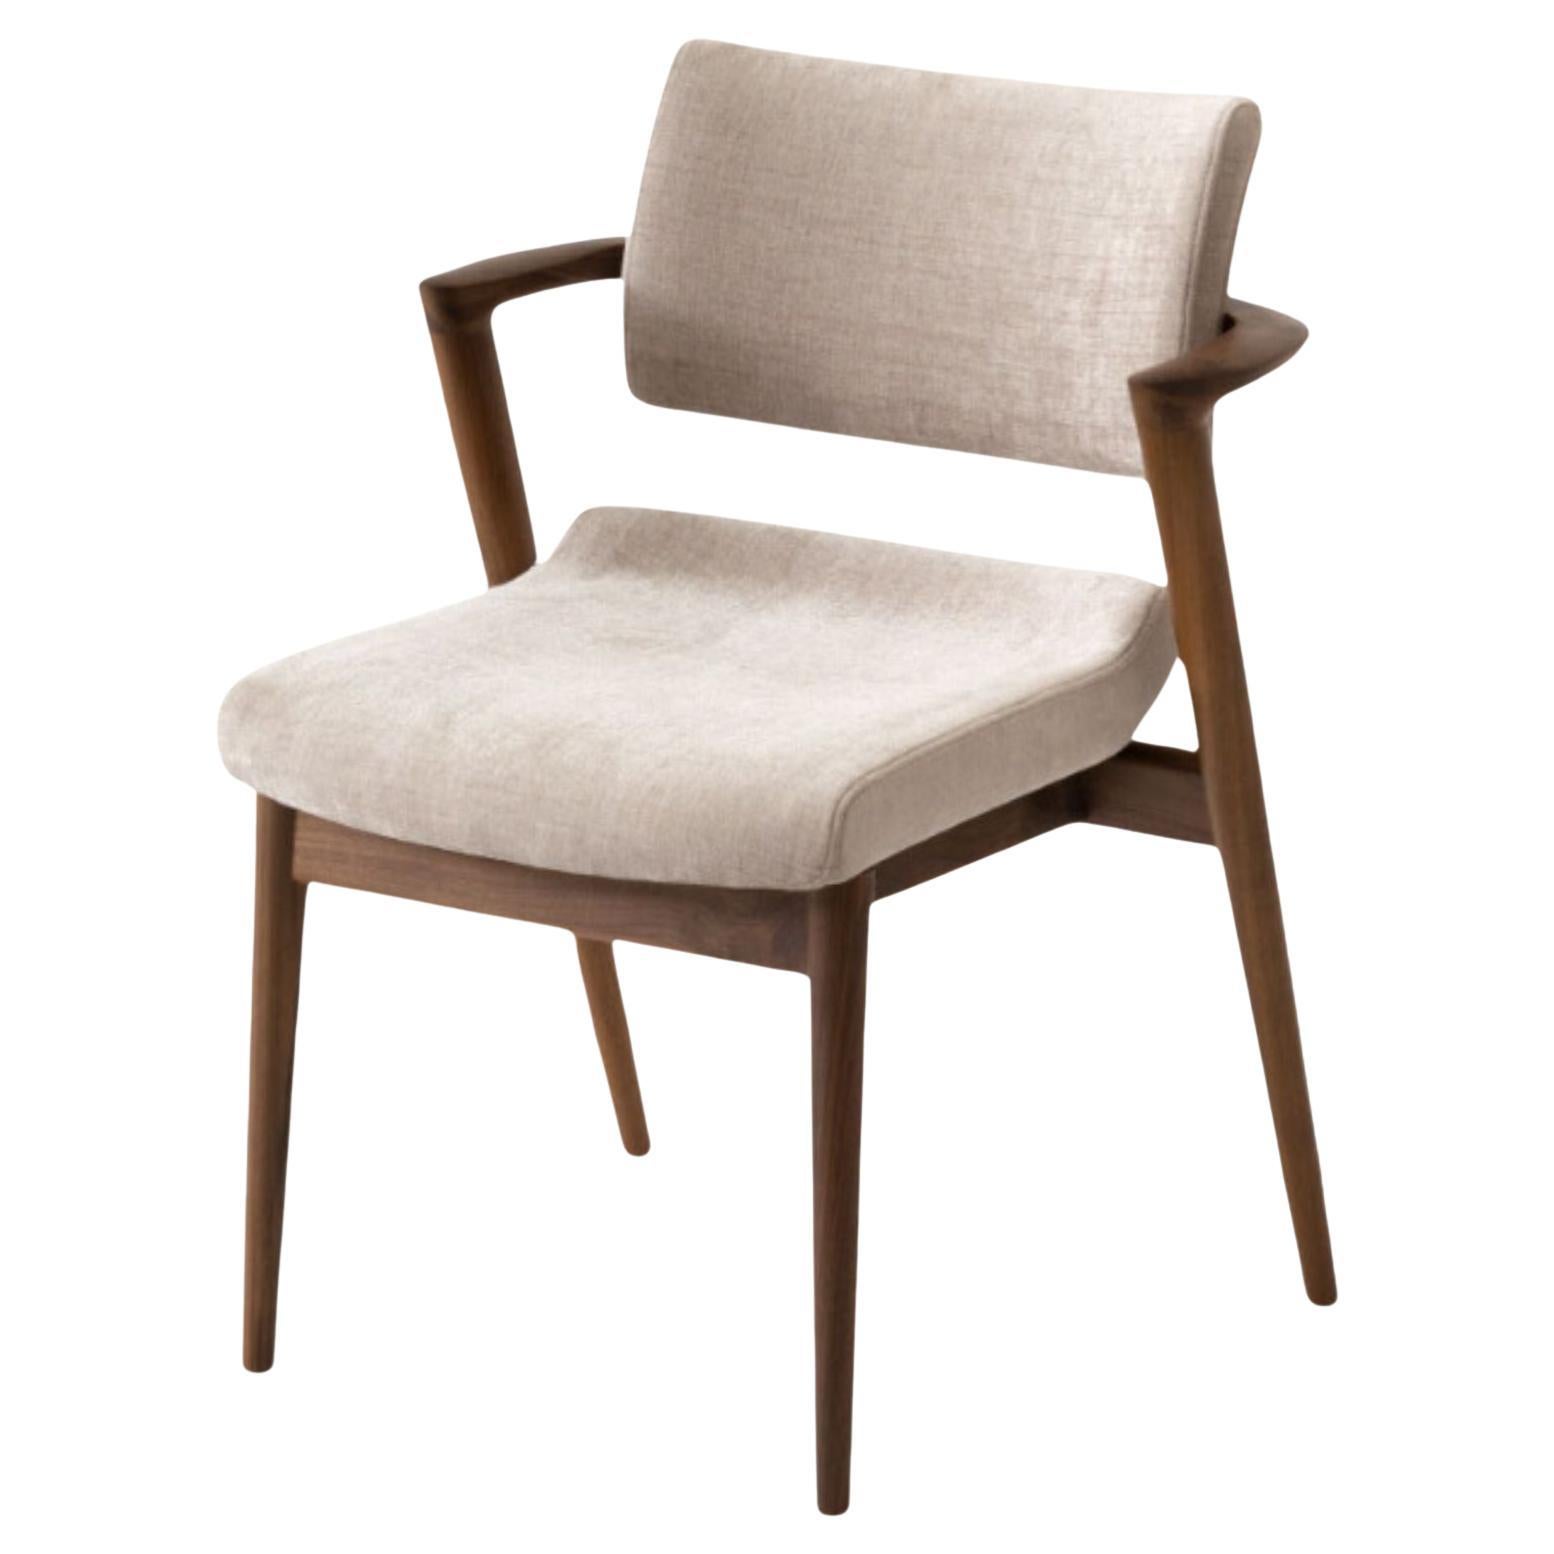 Motomi Kawakami 'Seoto-Ex KX250' Semi-Arm Chair in Oak & Upholstery for Hida In New Condition For Sale In Glendale, CA